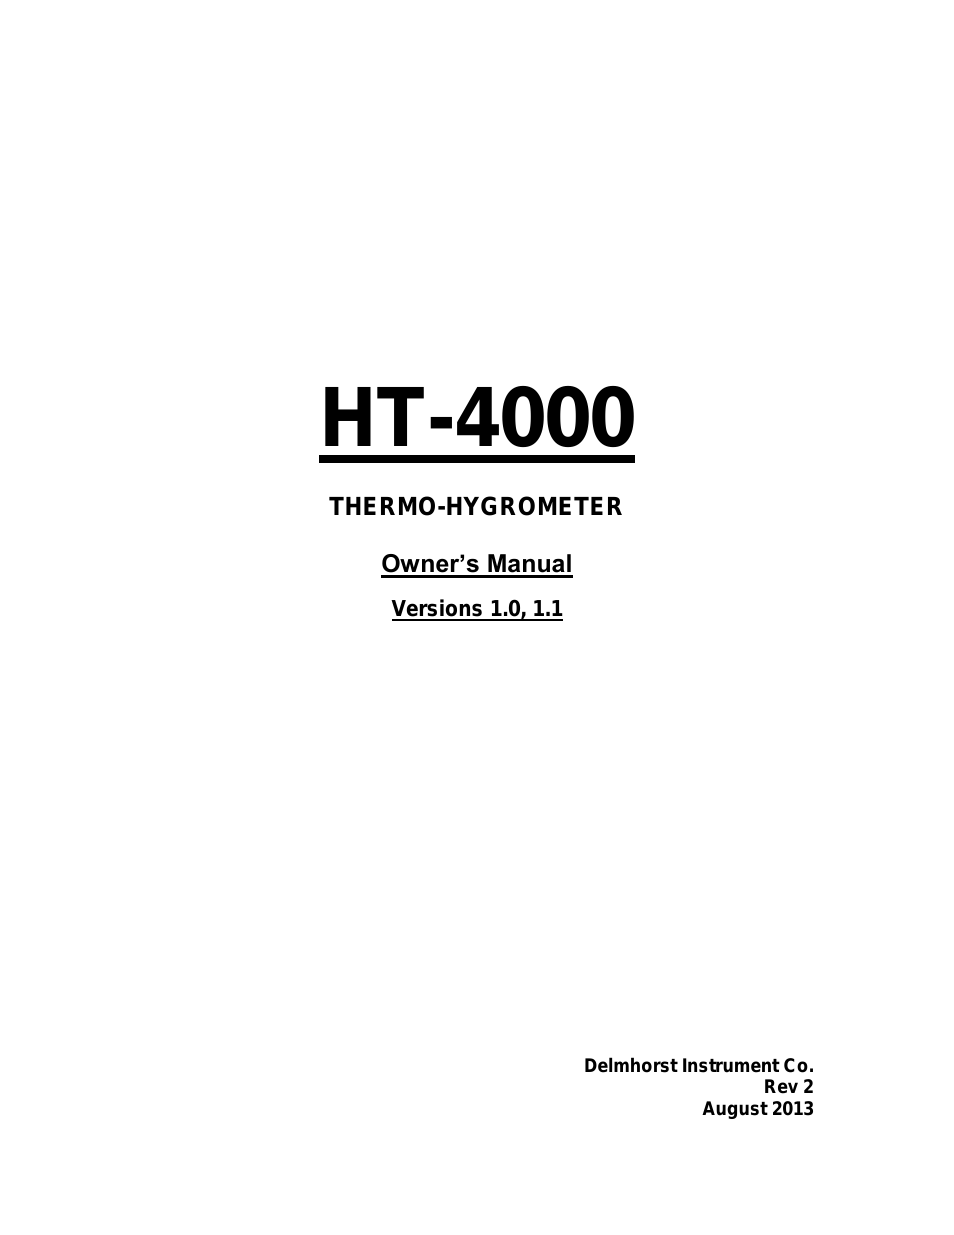 HT-4000 (Page 1)